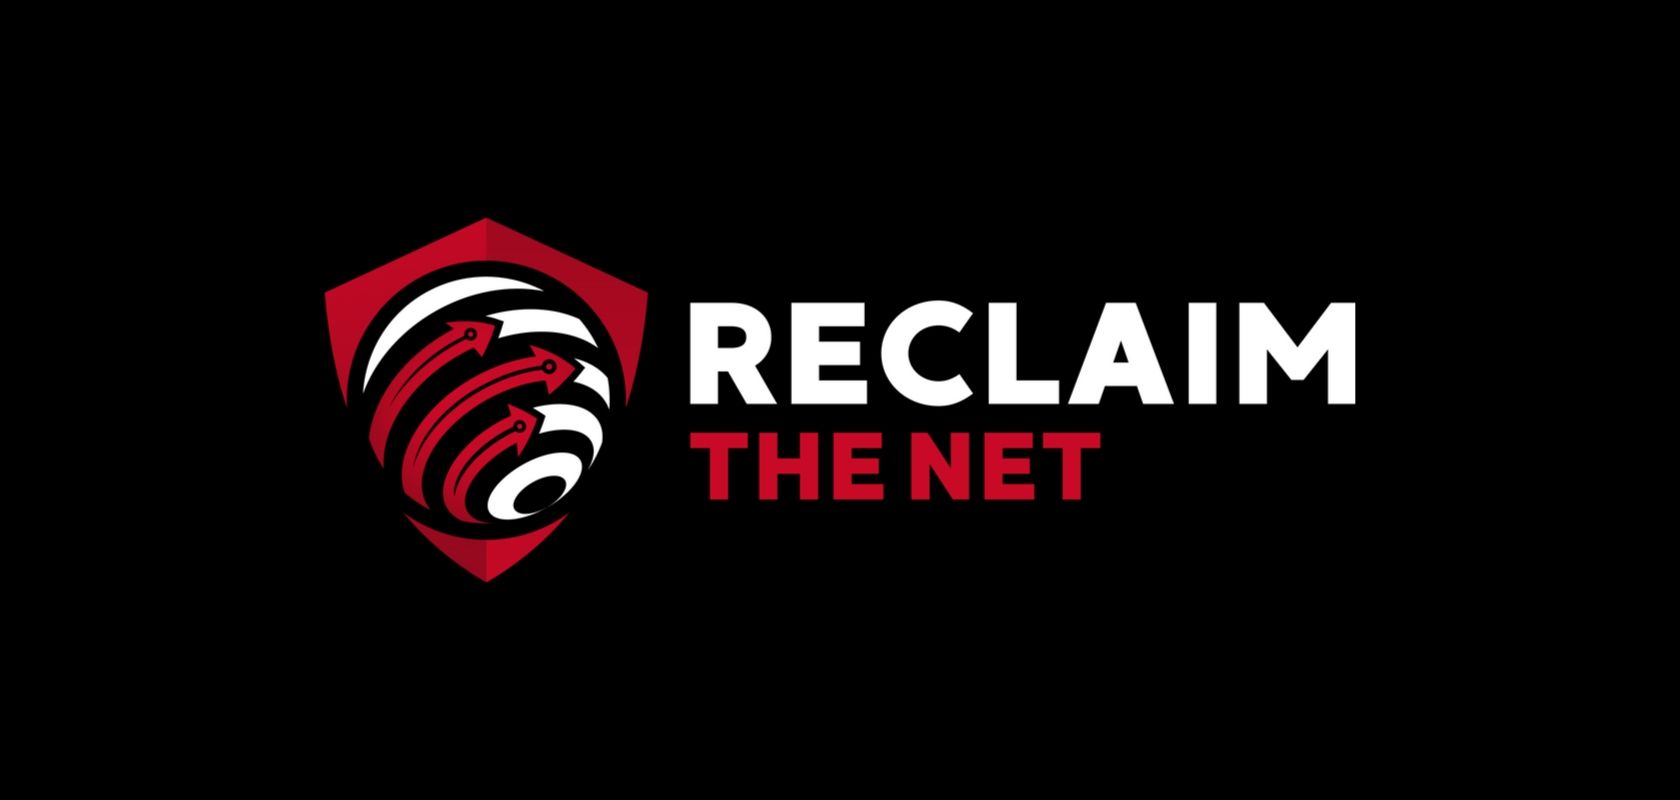 Become a Reclaim The Net Member